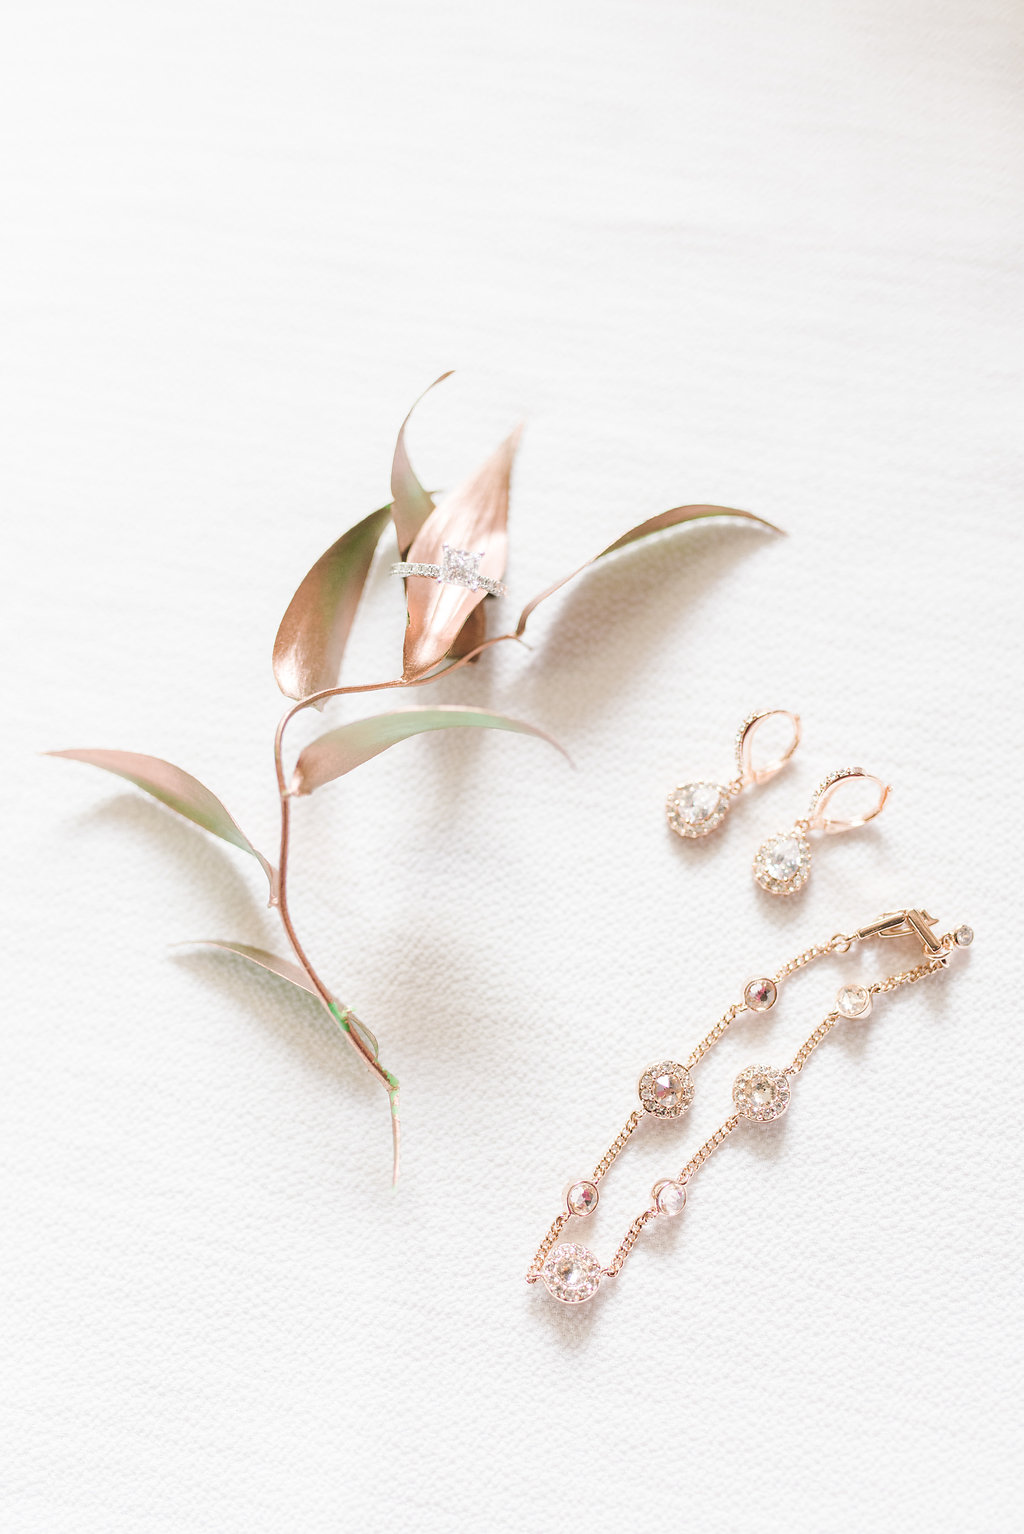 Rose Gold and Crystal Bridal Jewelry and Wedding Accessories